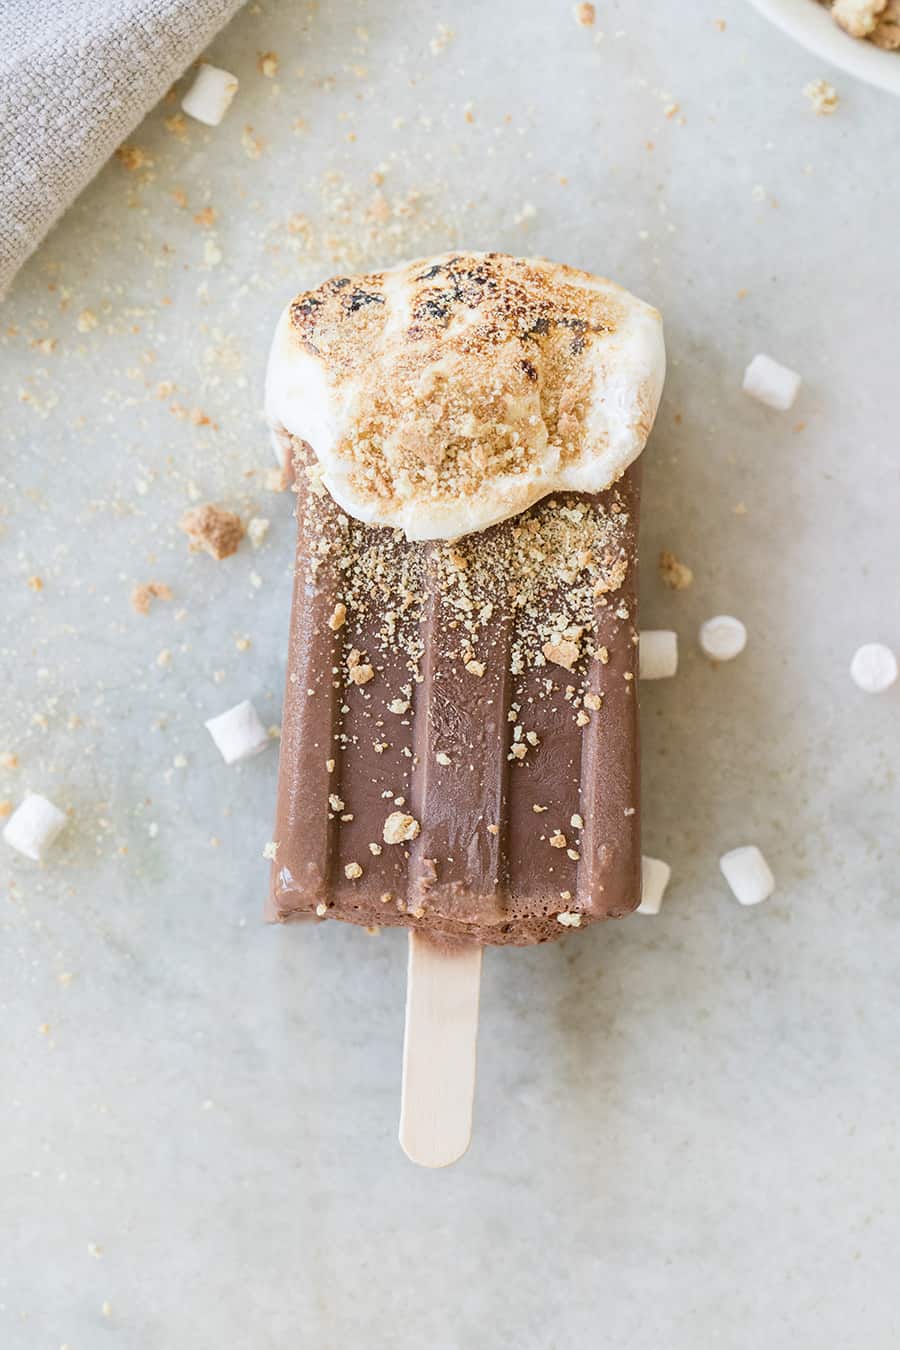  fudge popsicles with toasted marshmallow 